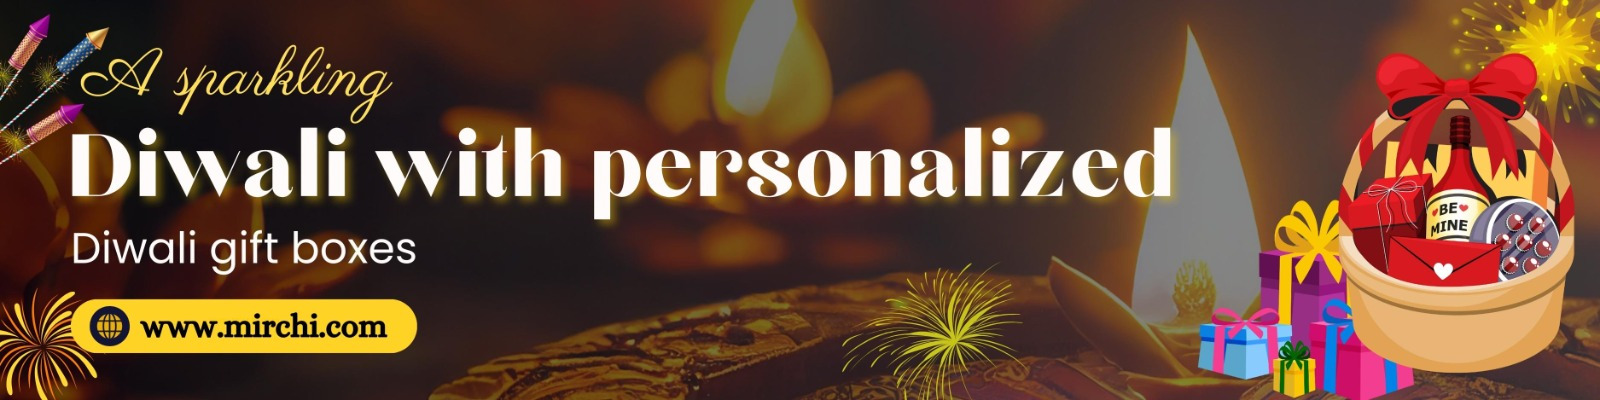 A sparkling Diwali with personalized Diwali gift boxes